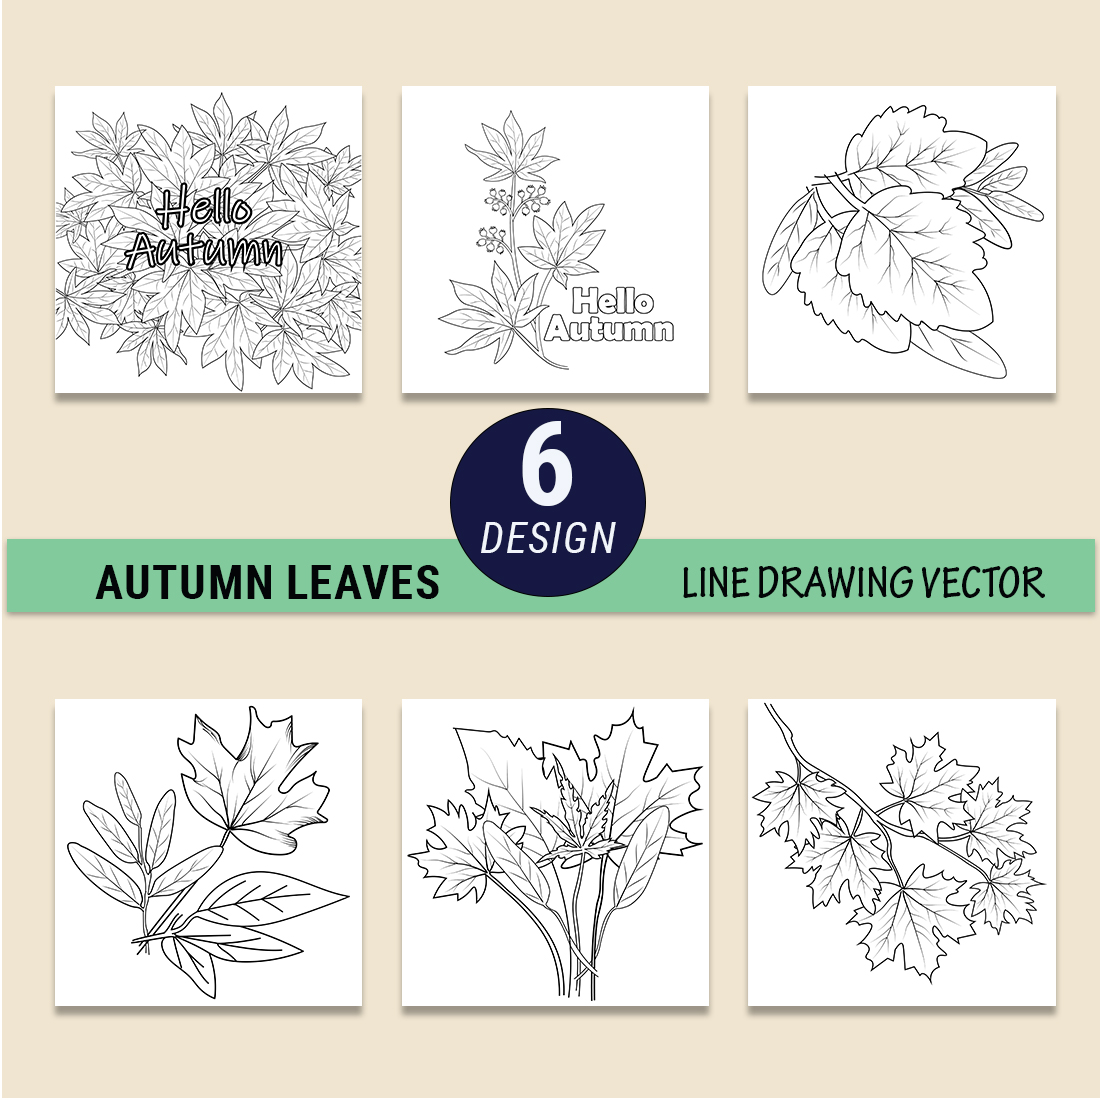 Autumn harvest vegetable pumpkin Autumn Fall season coloring illustration pages, Maple ornate leaves in black isolated on white background cover image.